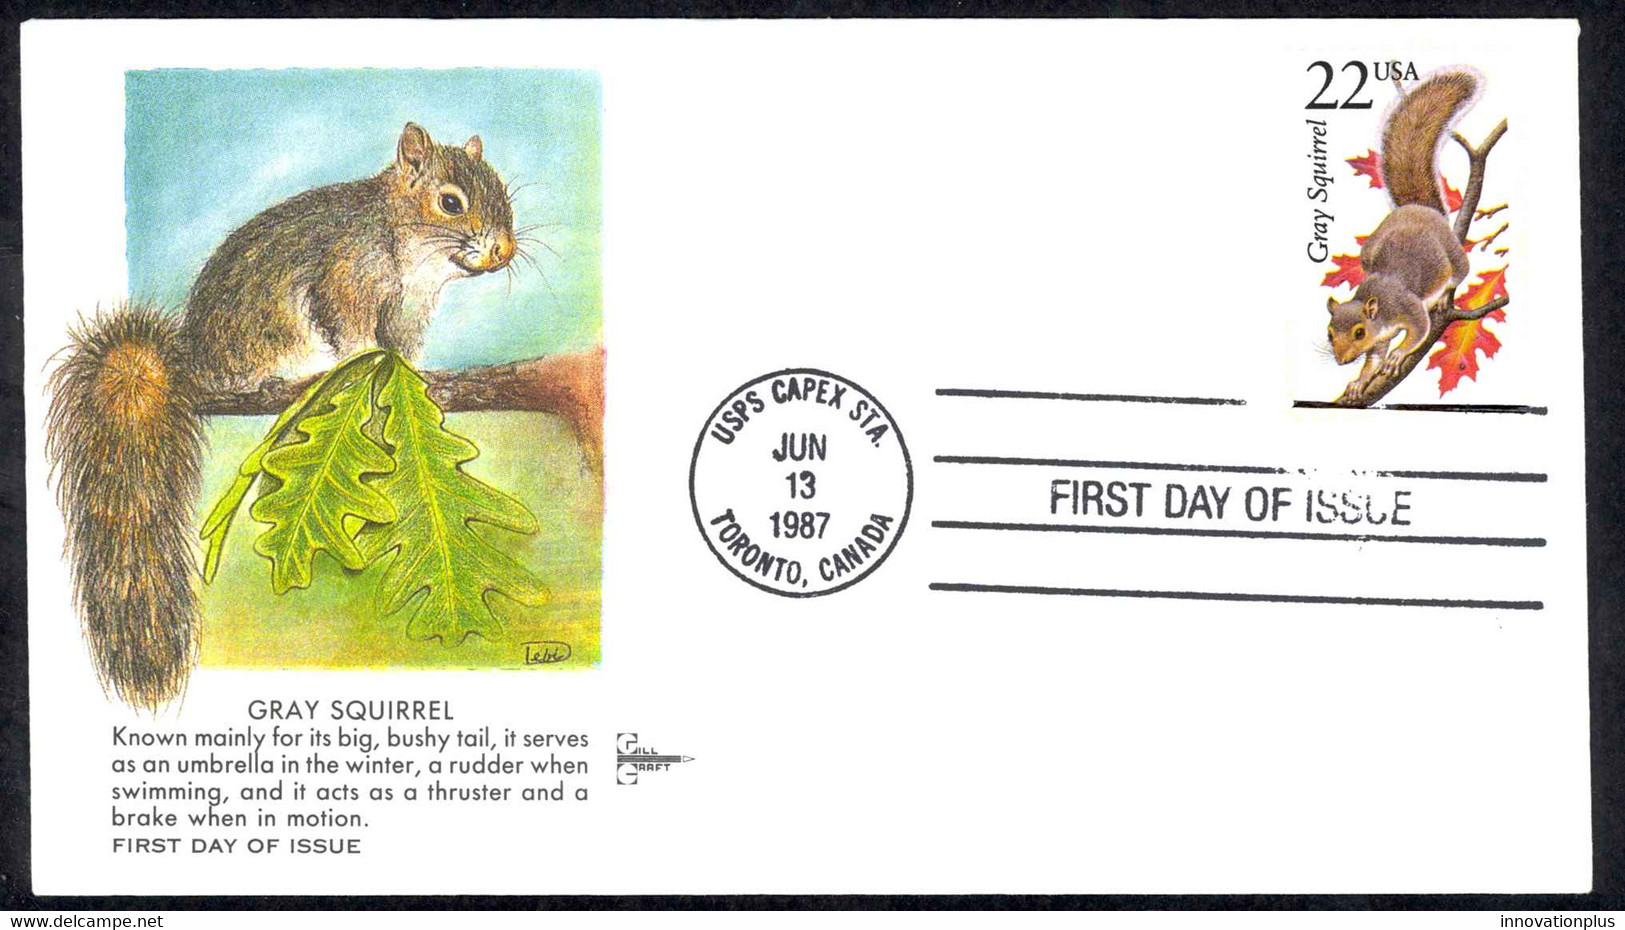 USA Sc# 2295 (Gill Craft) FDC (USPS CAPEX STATION) 1987 6.13 Gray Squirrel - 1981-1990